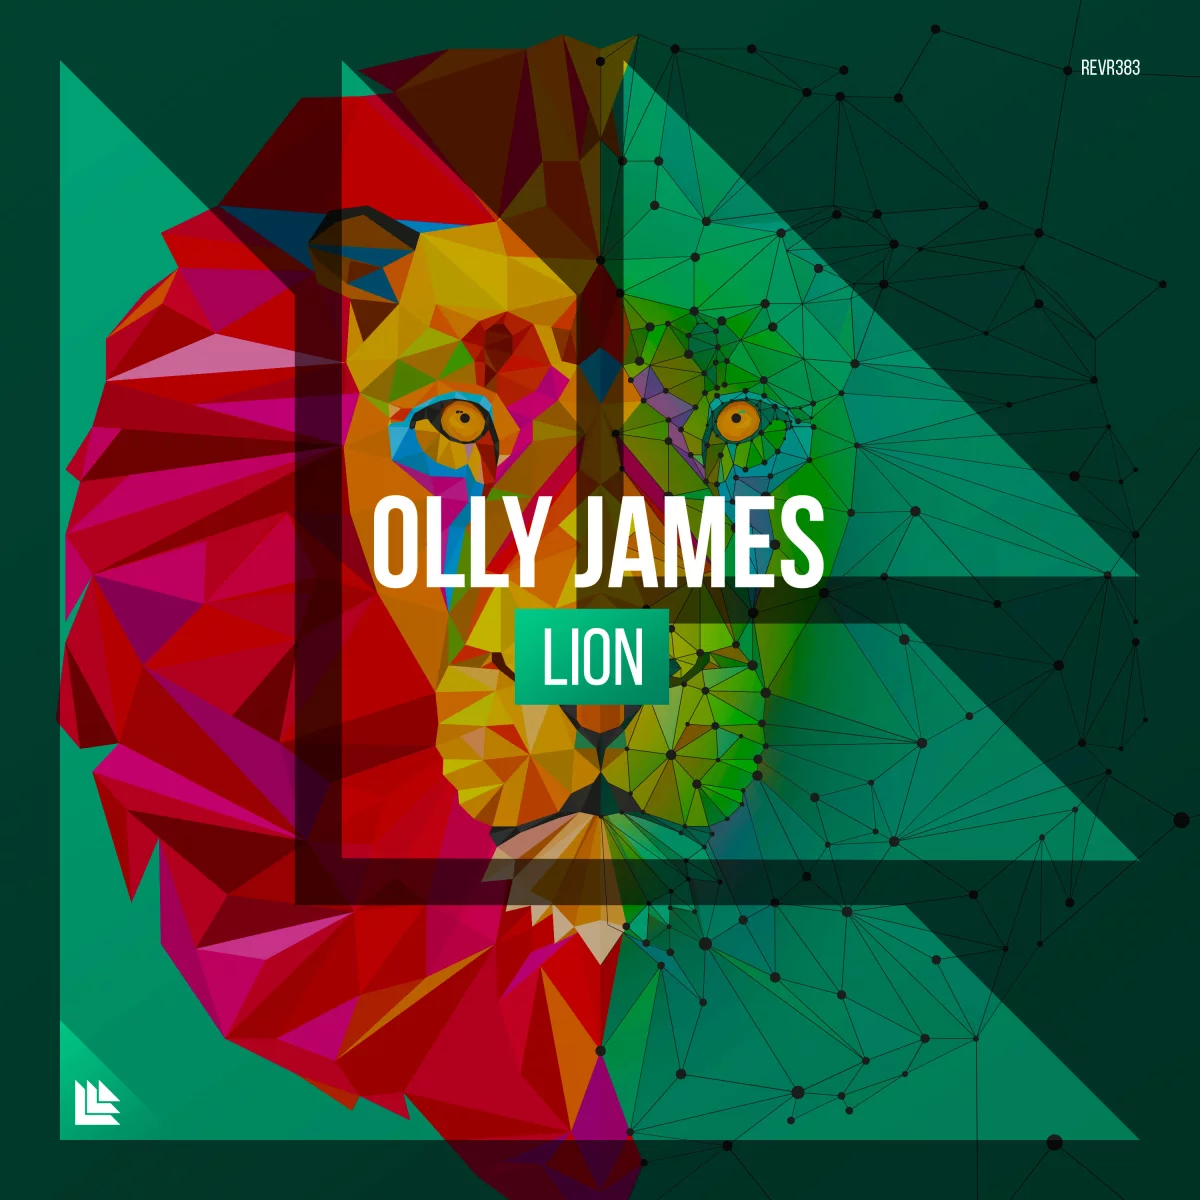 Lion - Olly James⁠